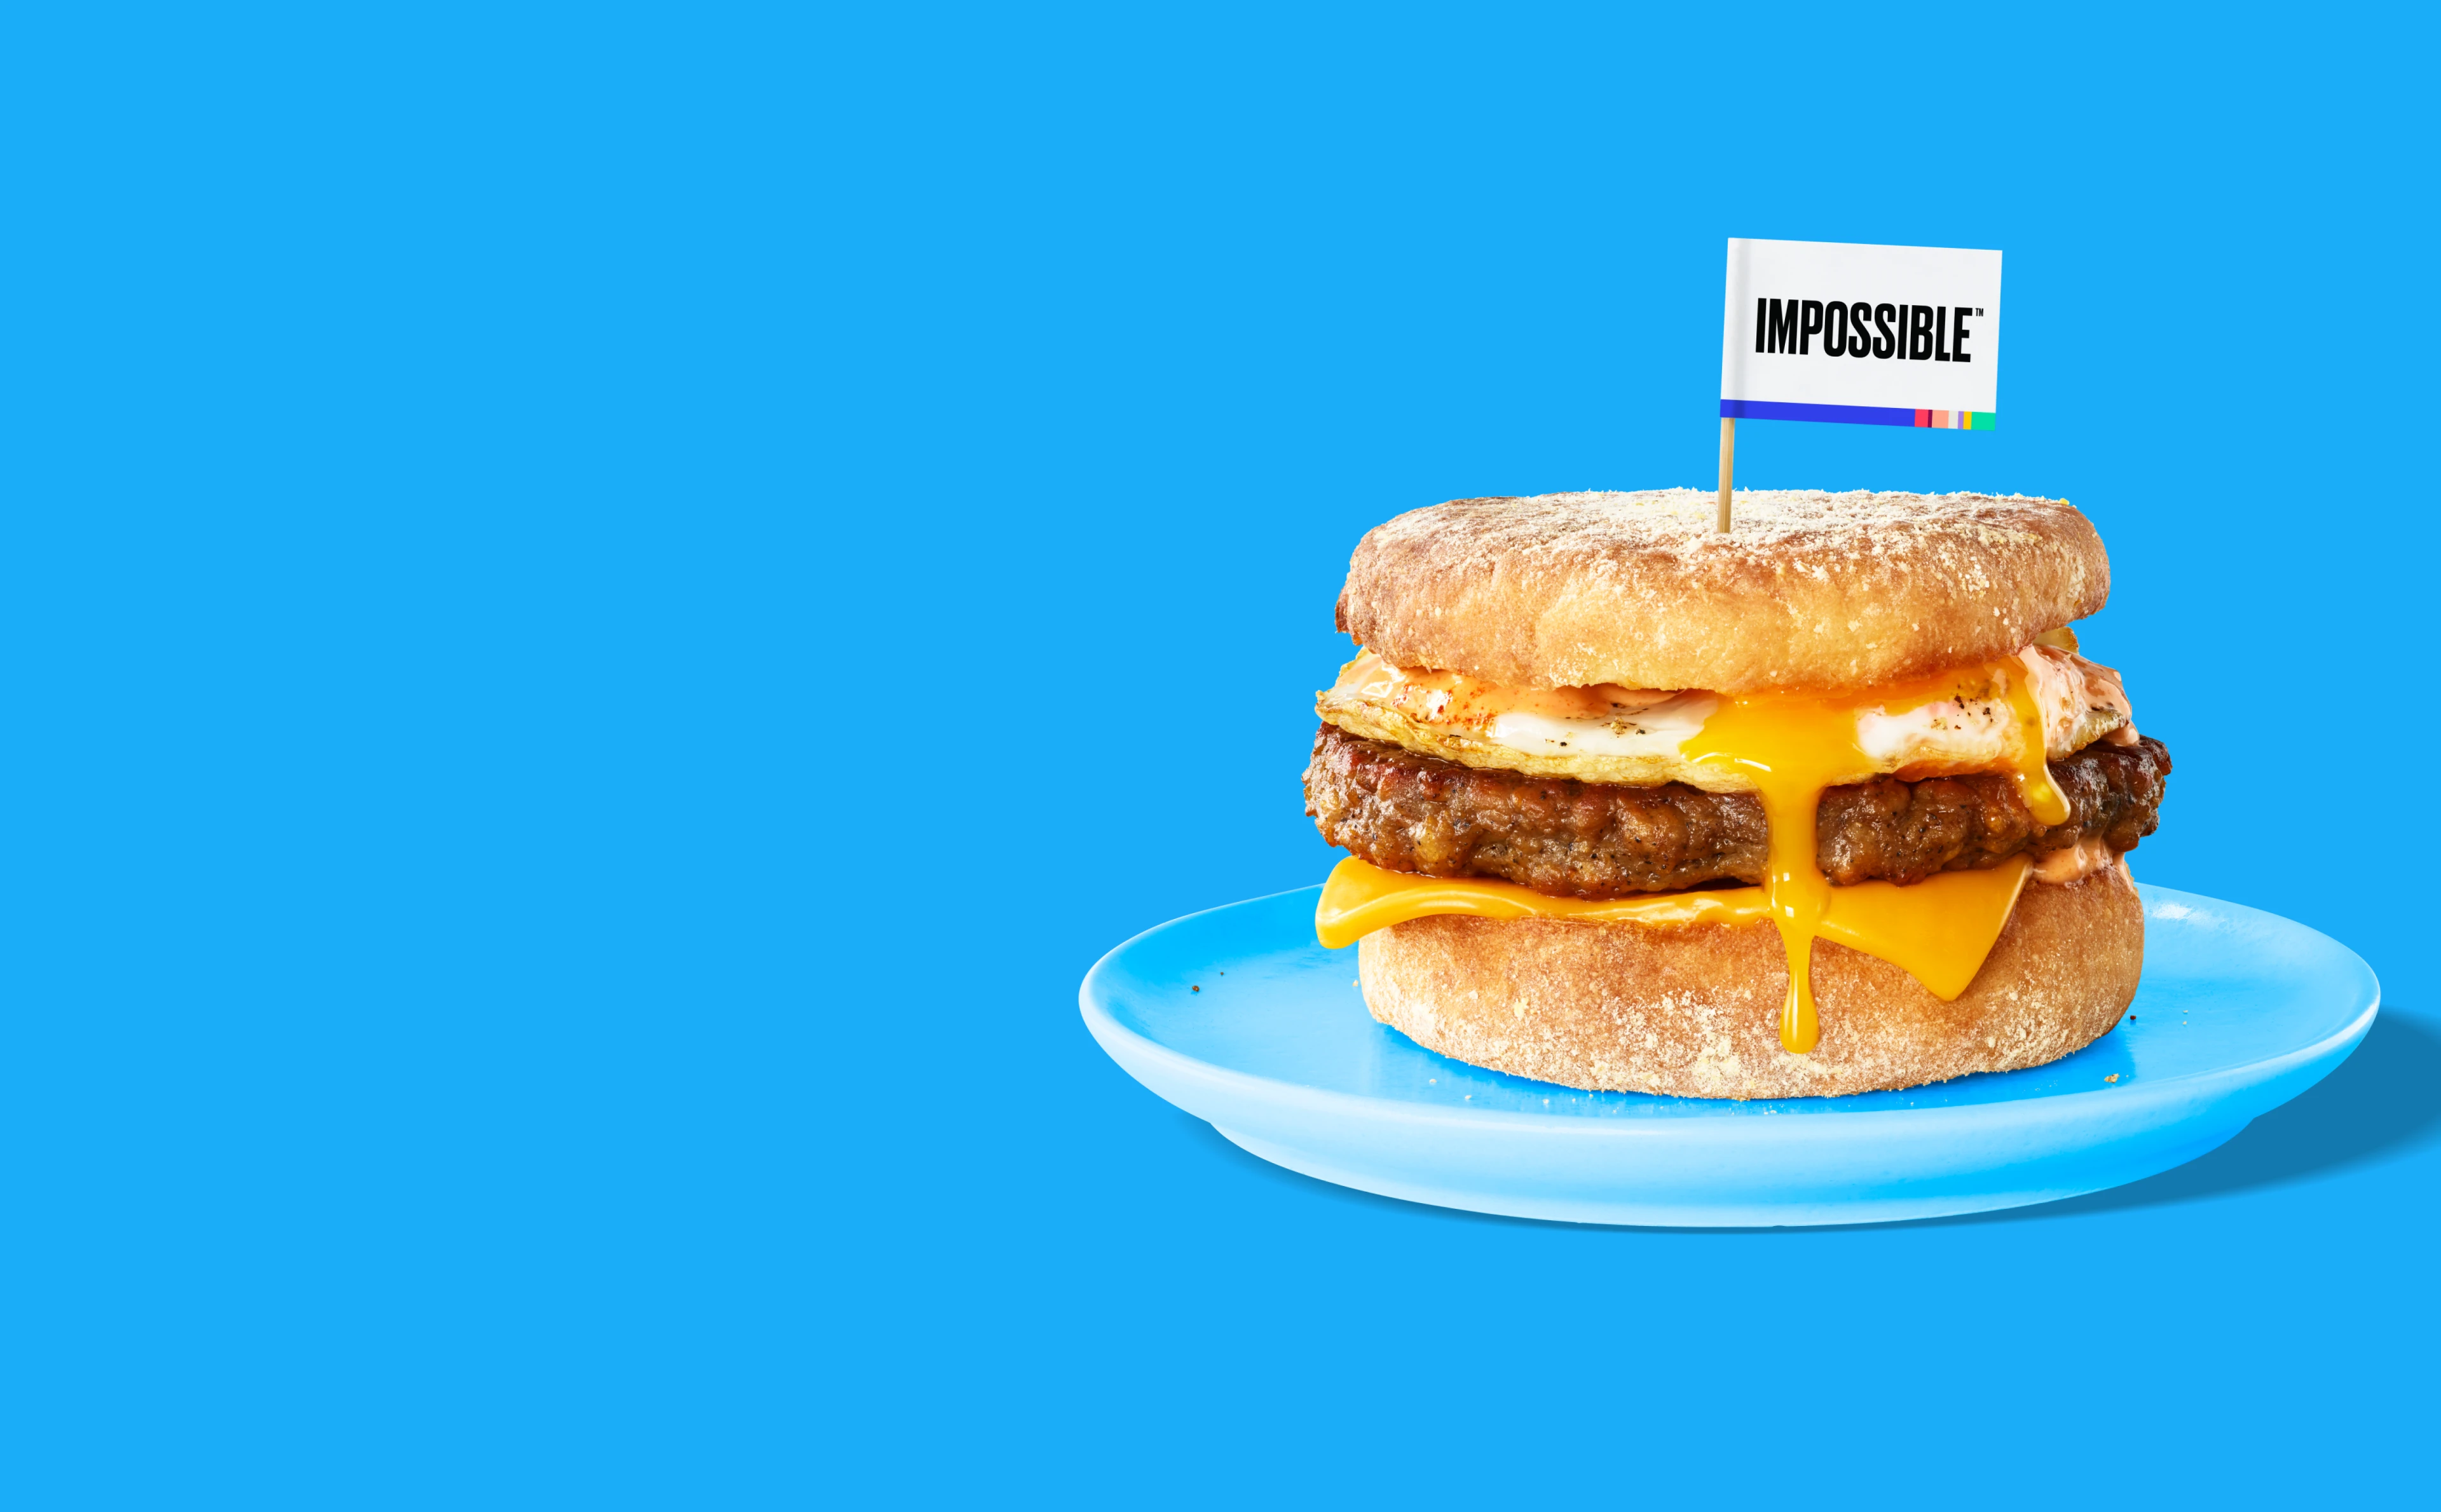 An Impossible Sausage breakfast sandwich dripping with egg and cheese on a blue plate and blue background